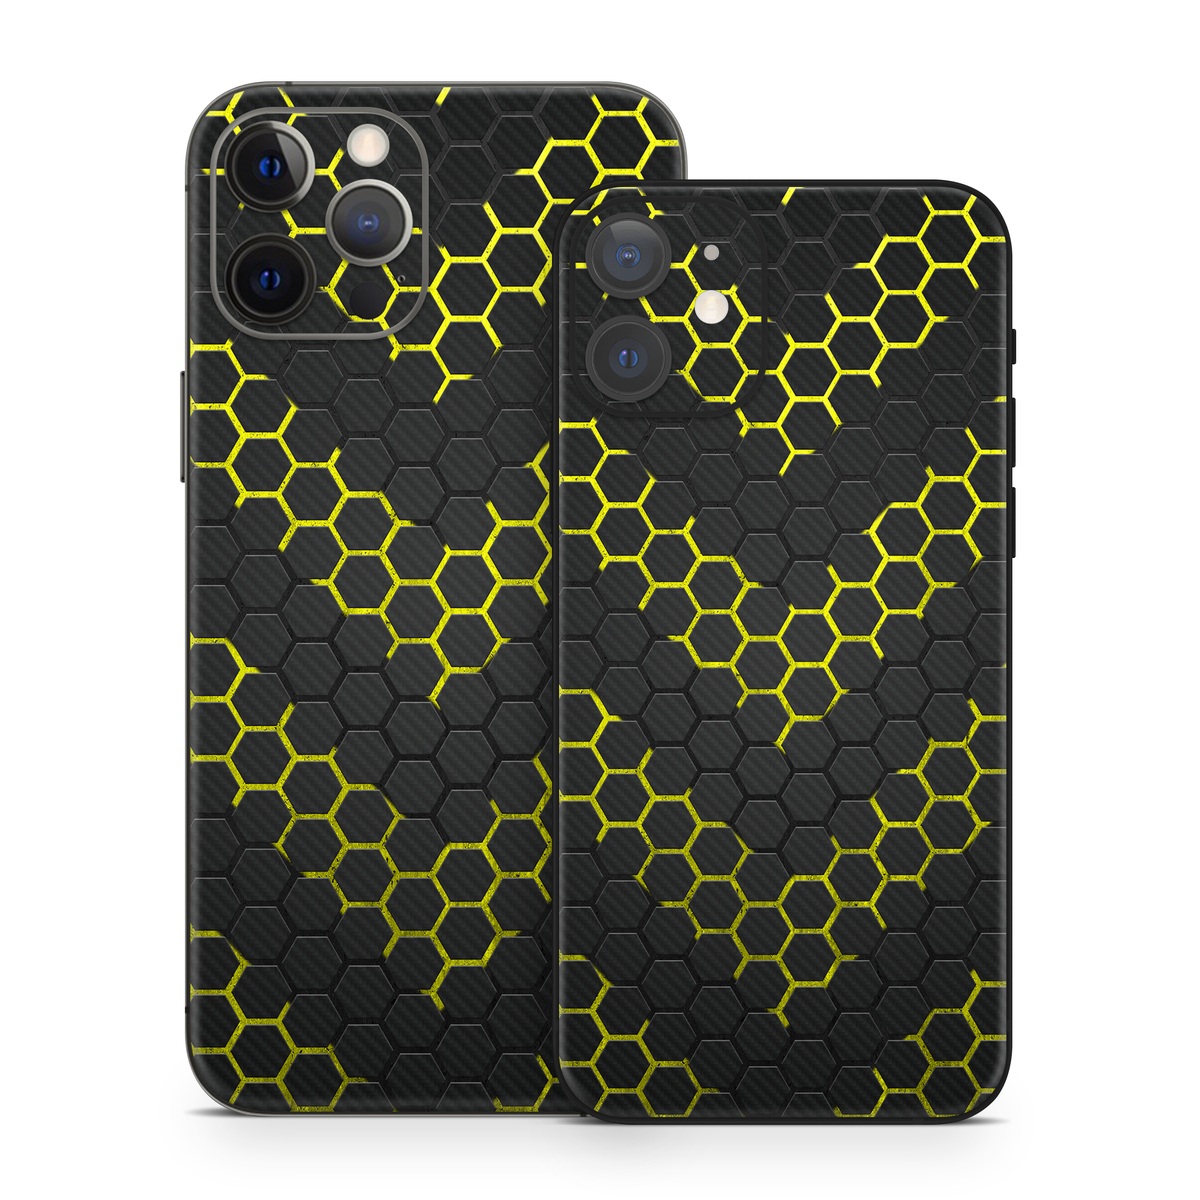 iPhone 12 Skin design of Black, Pattern, Yellow, Mesh, Net, Chain-link fencing, Design, Metal, with black, gray, yellow colors